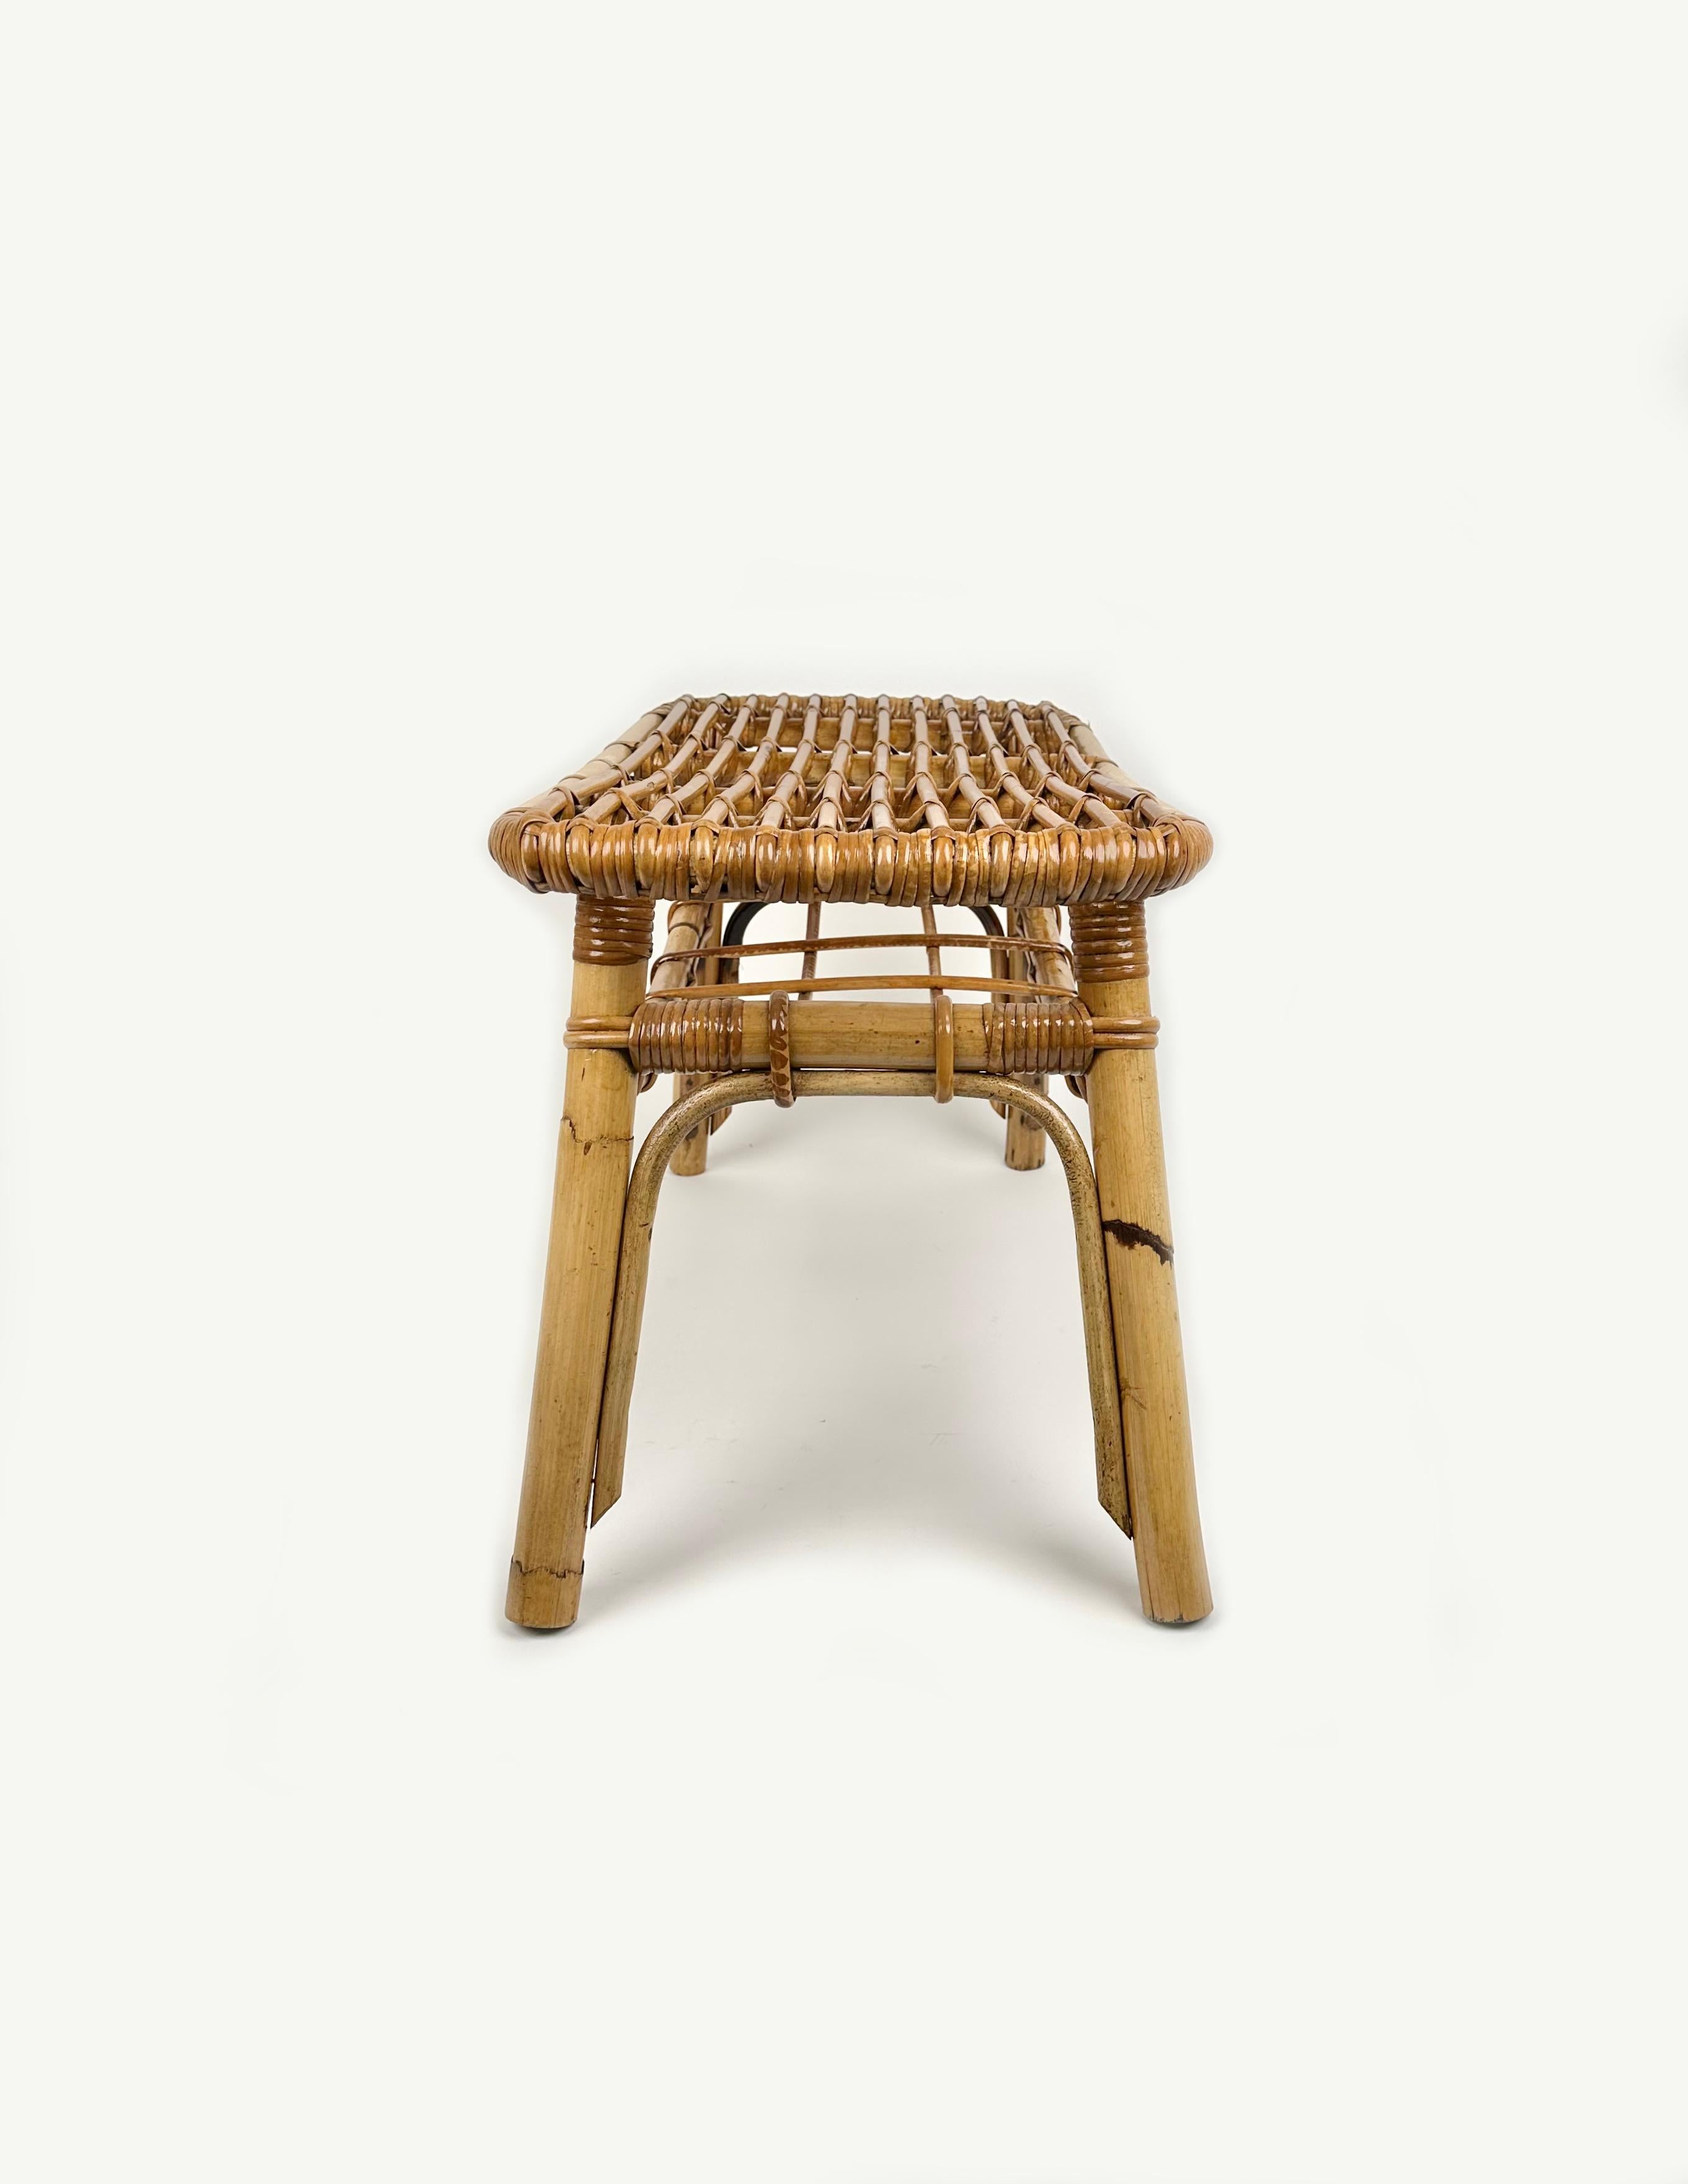 Bamboo & Rattan French Riviera Coffee Table with Magazine Rack, Italy 1960s For Sale 3